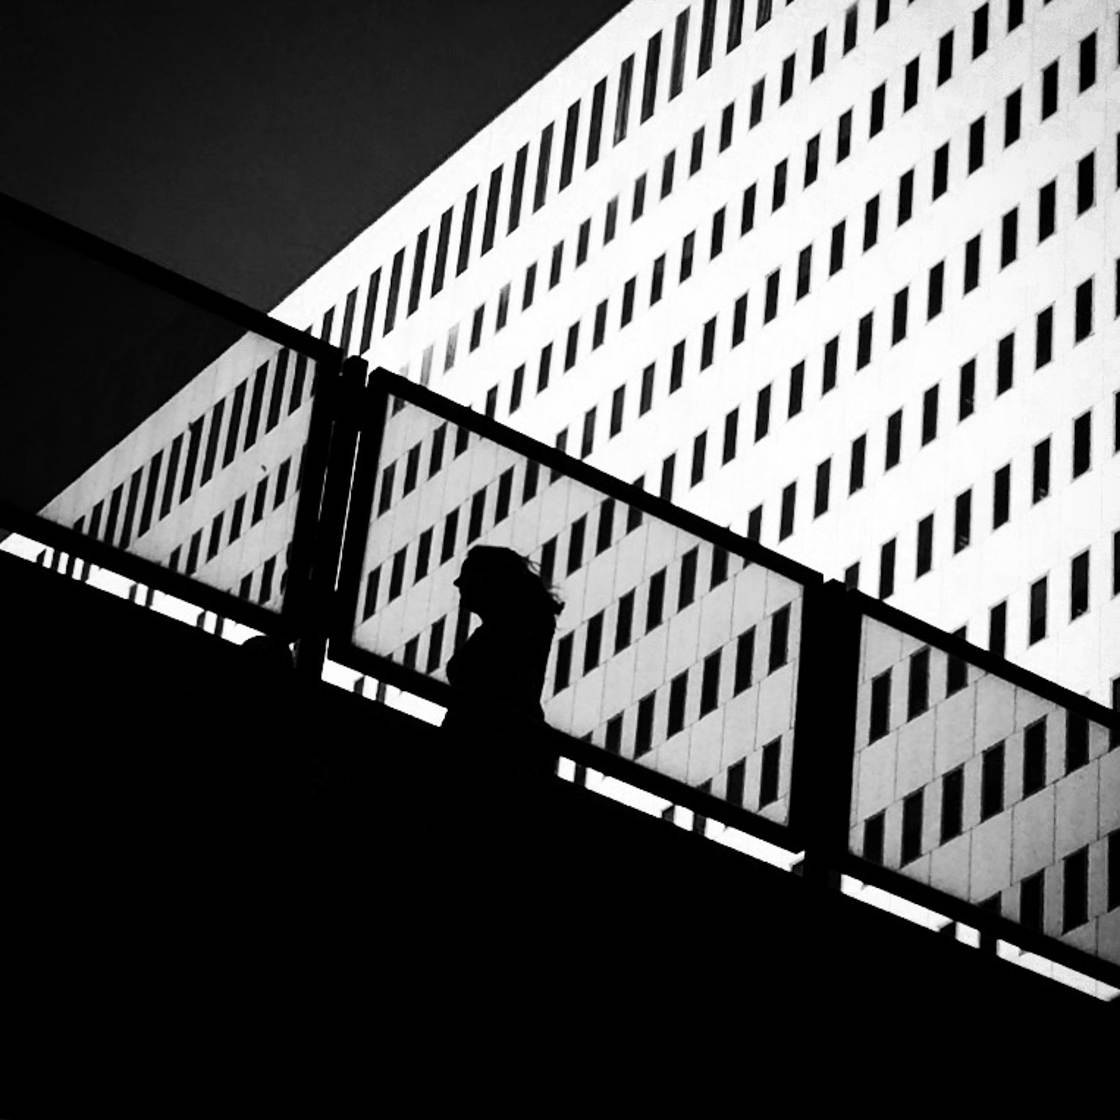 Black and white silhouette photography 10